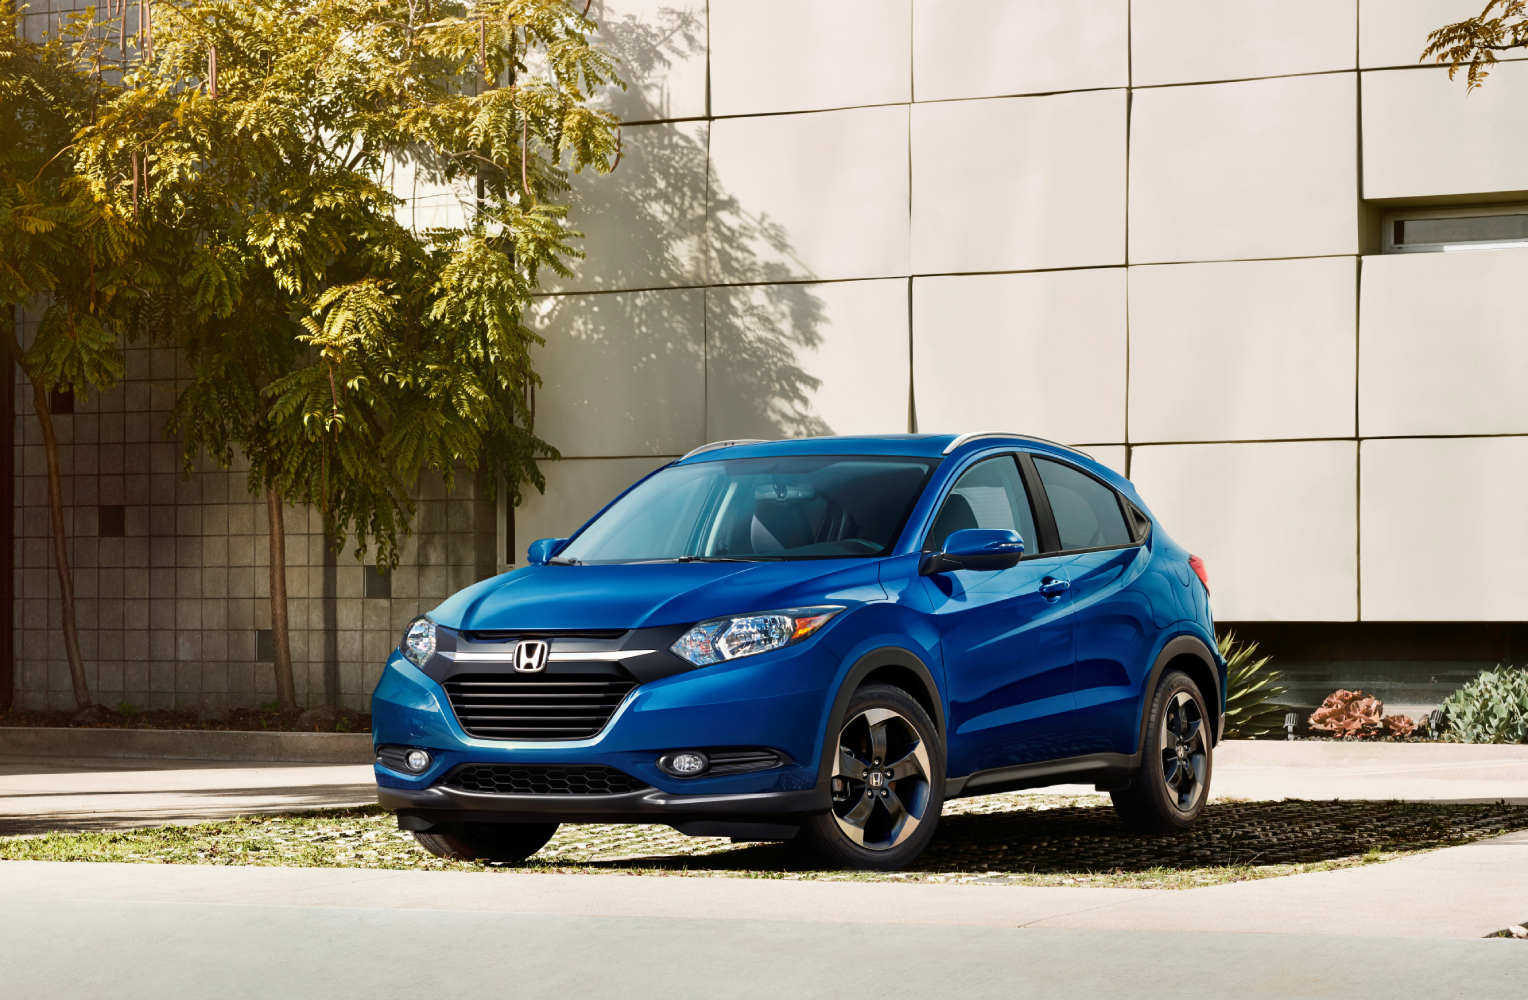 Kelley Blue Book's best used subcompact SUVs